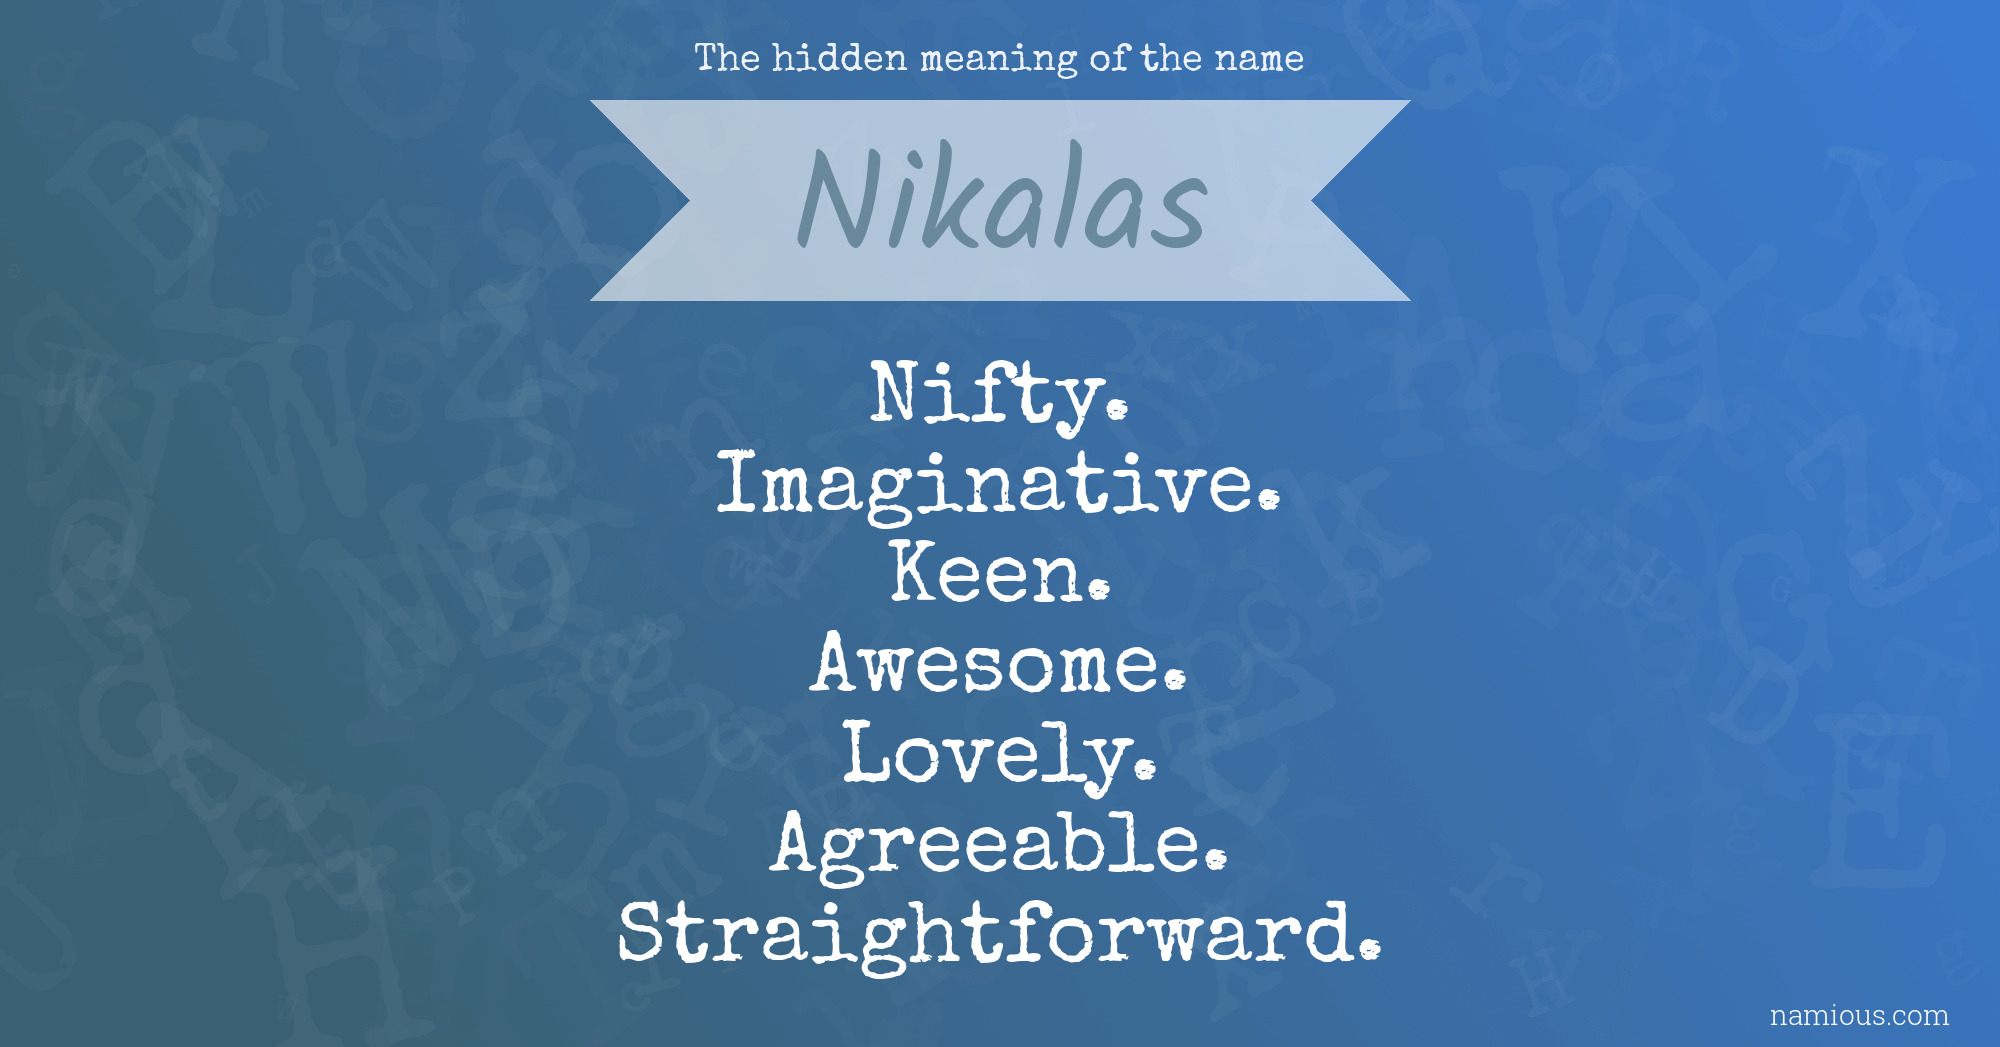 The hidden meaning of the name Nikalas